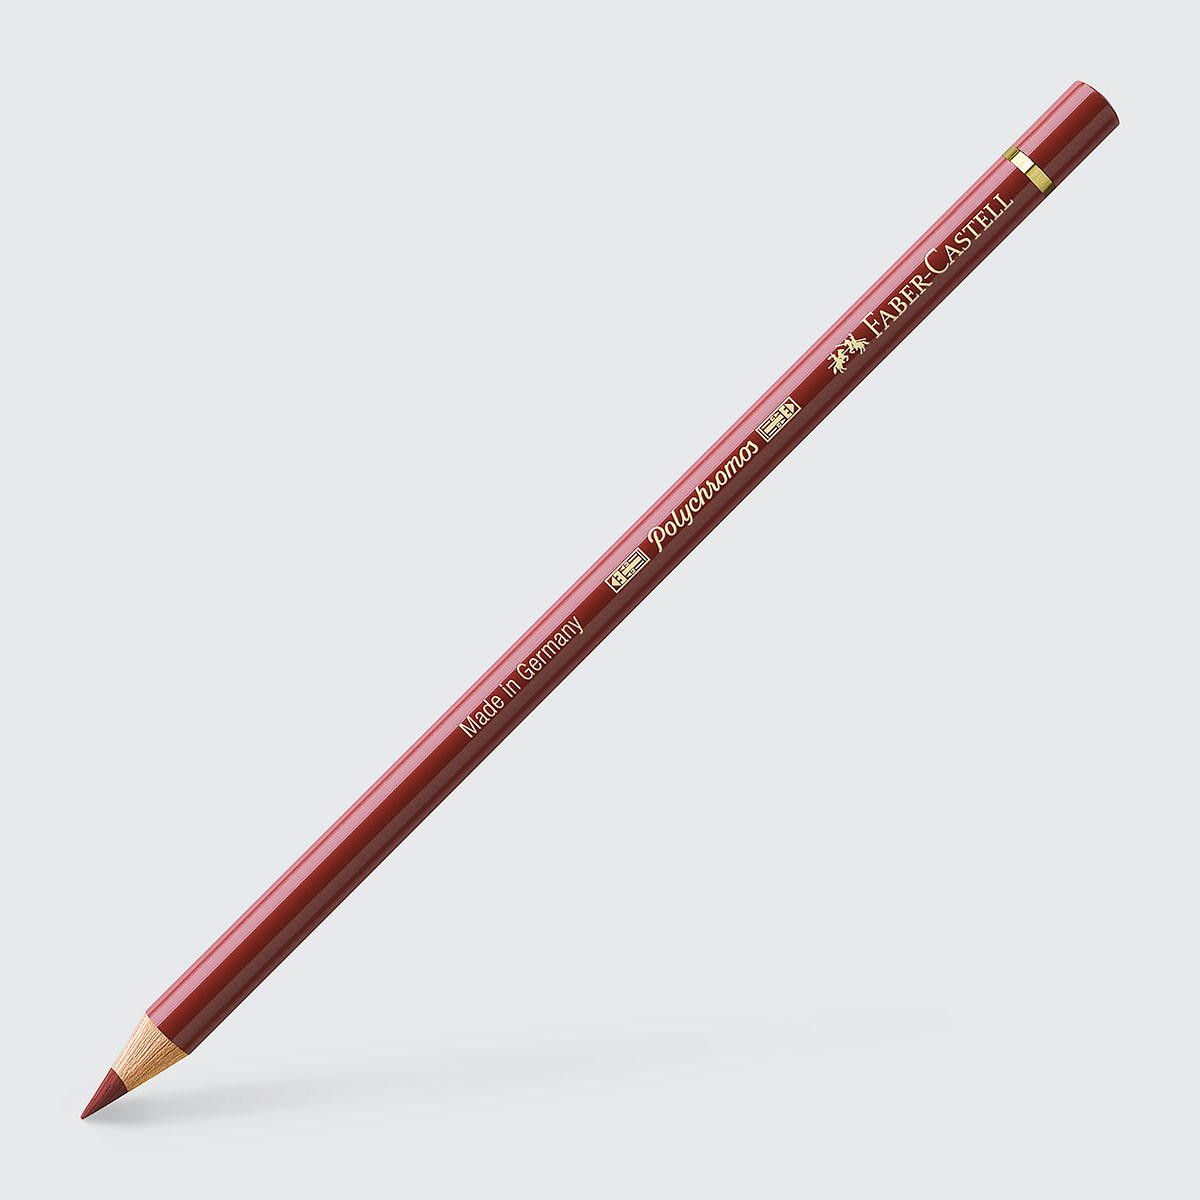 Faber-Castell Polychromos Artists’ Coloured Pencil One Size Indian Red (192)